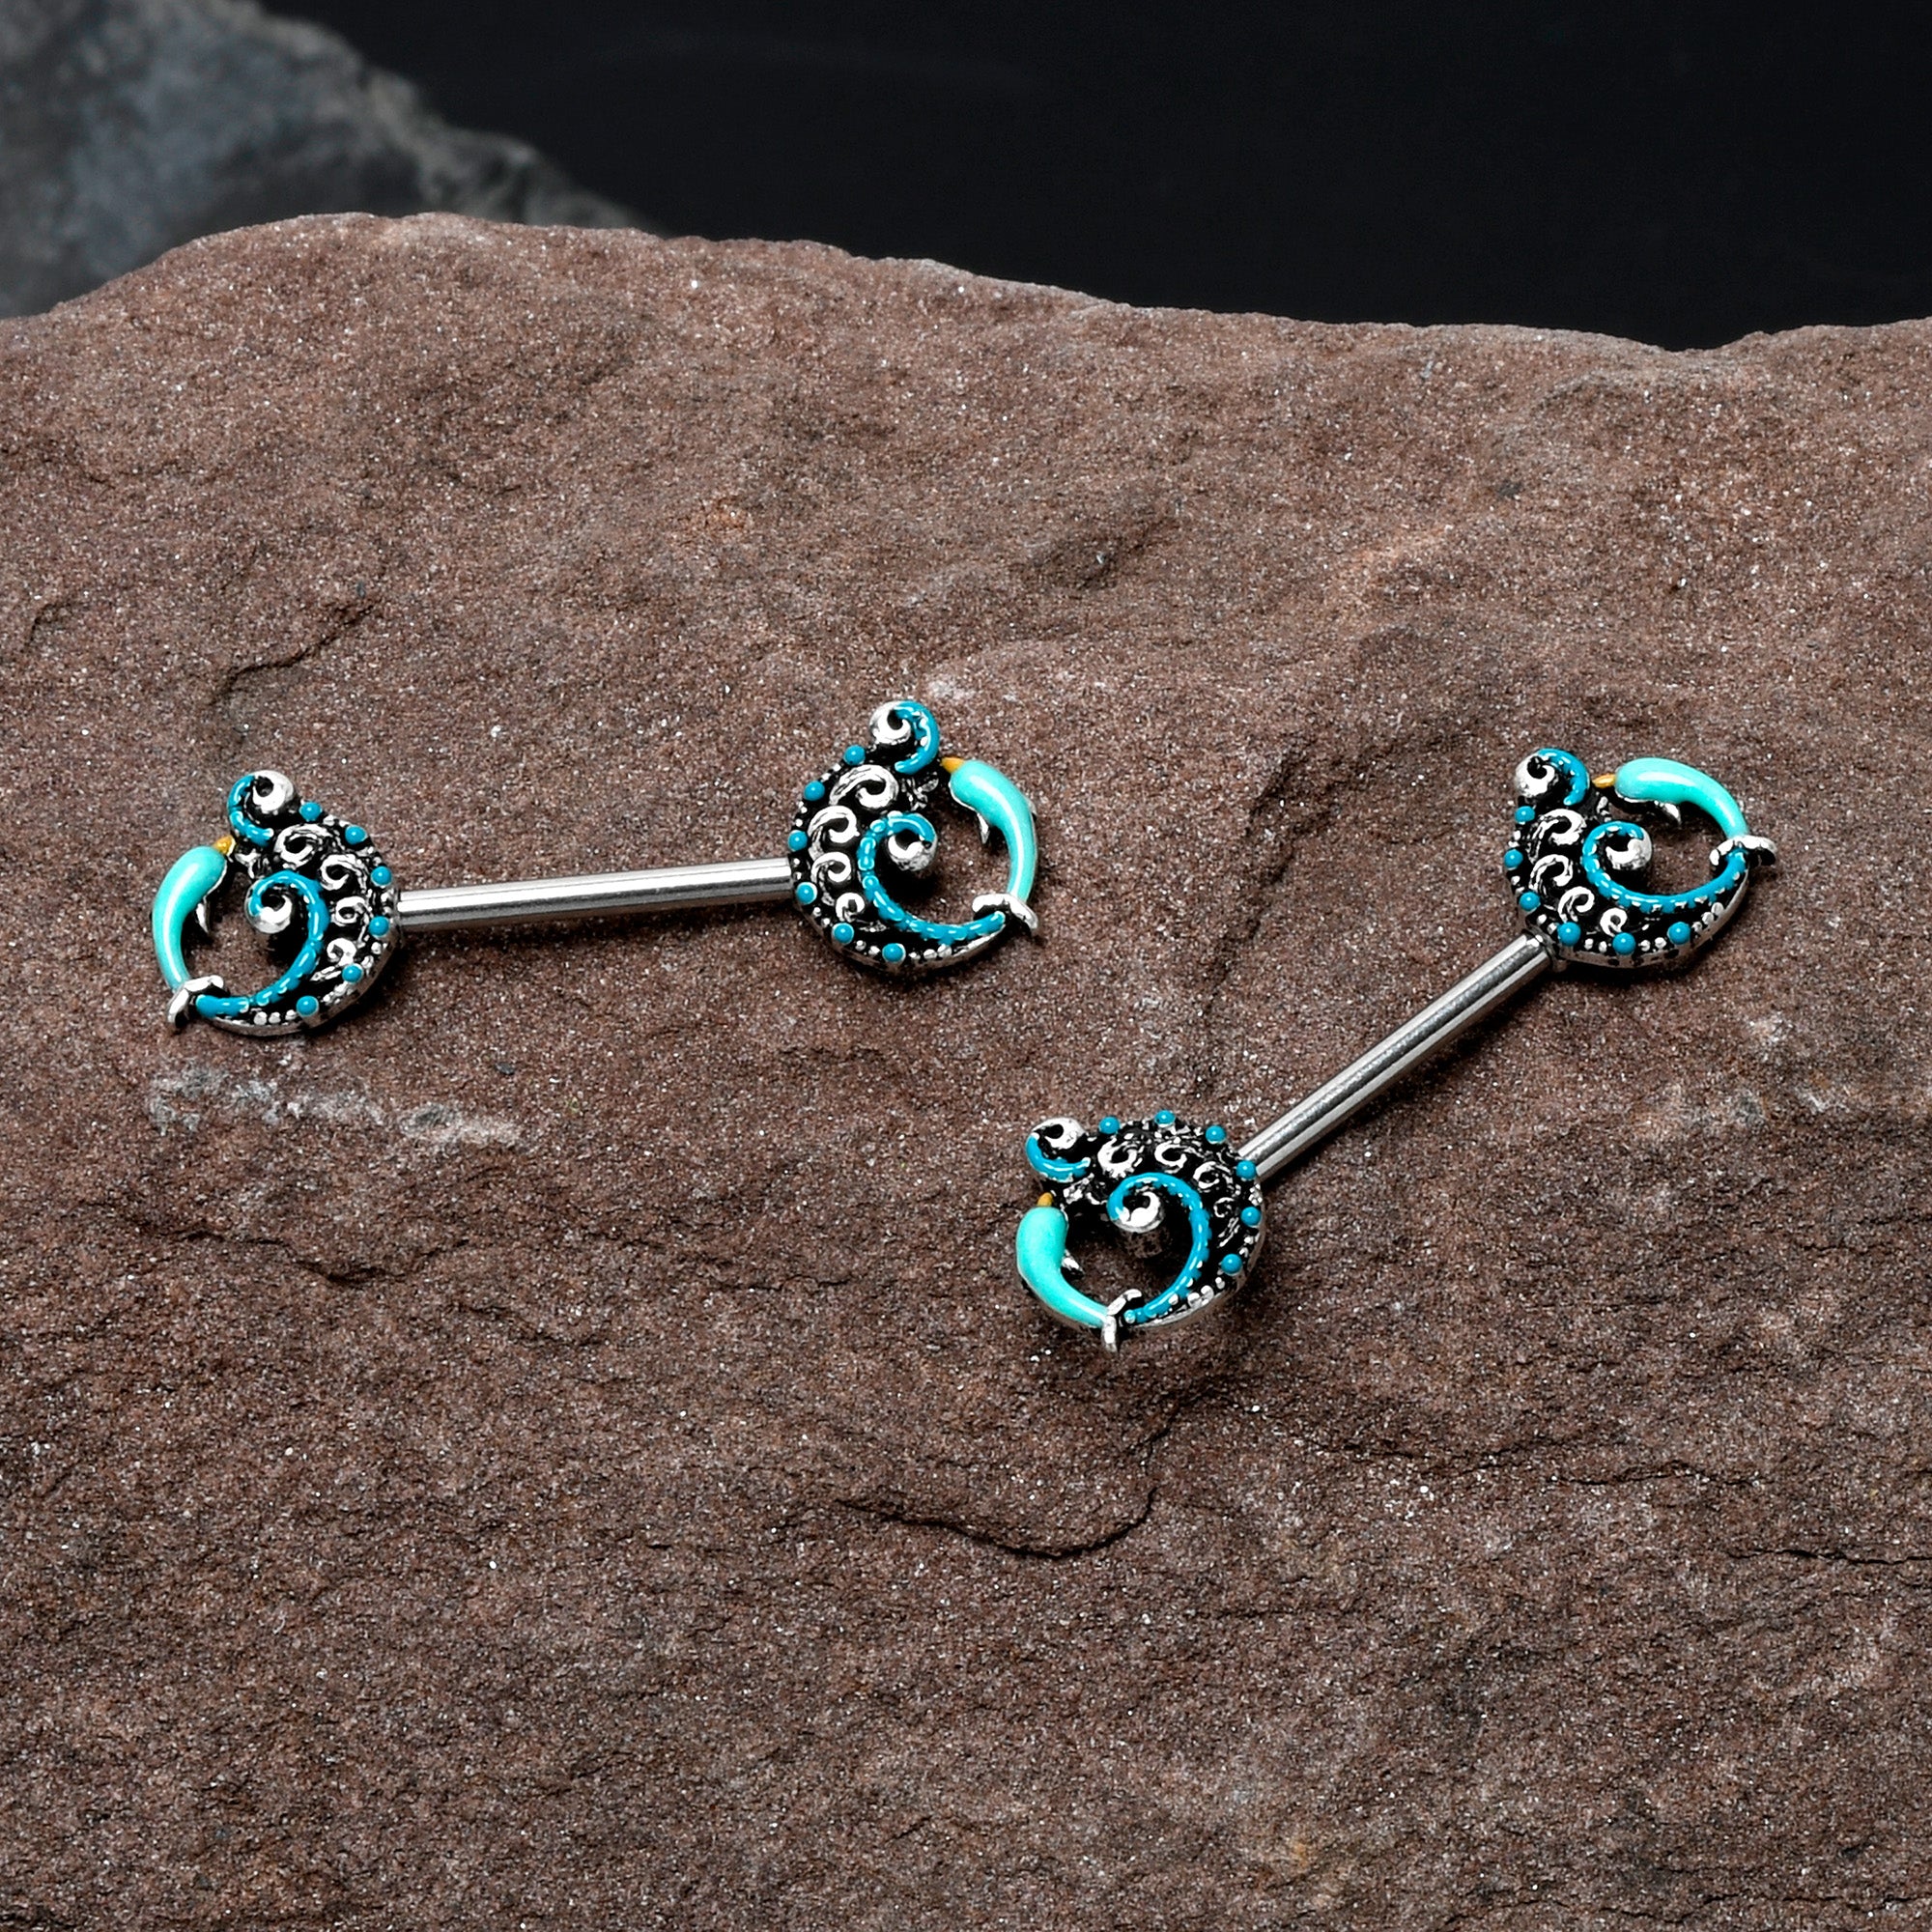 14 Gauge 9/16 Leaping Blue Dolphin Barbell Nipple Ring Set